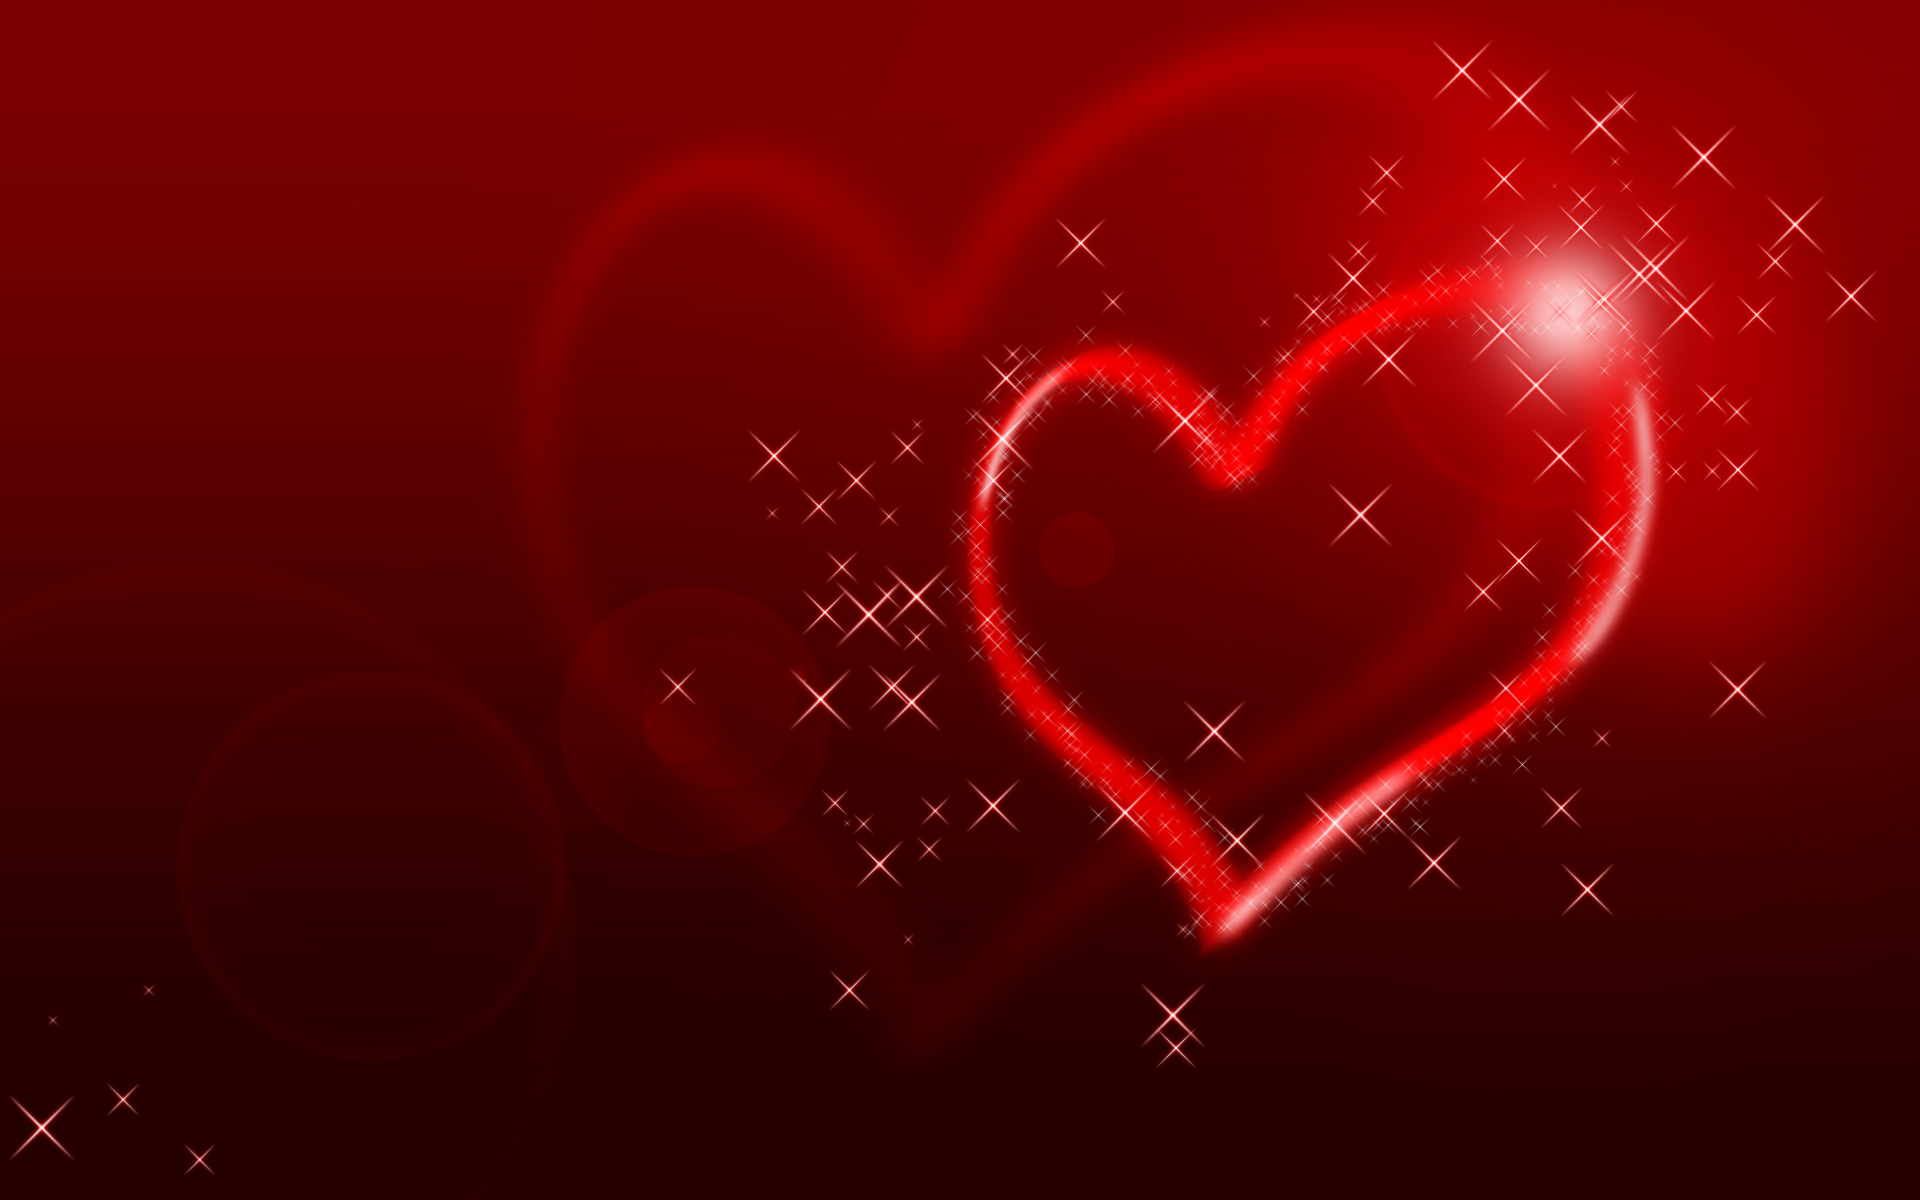  heart heart background glittering hearts related heart backgrounds